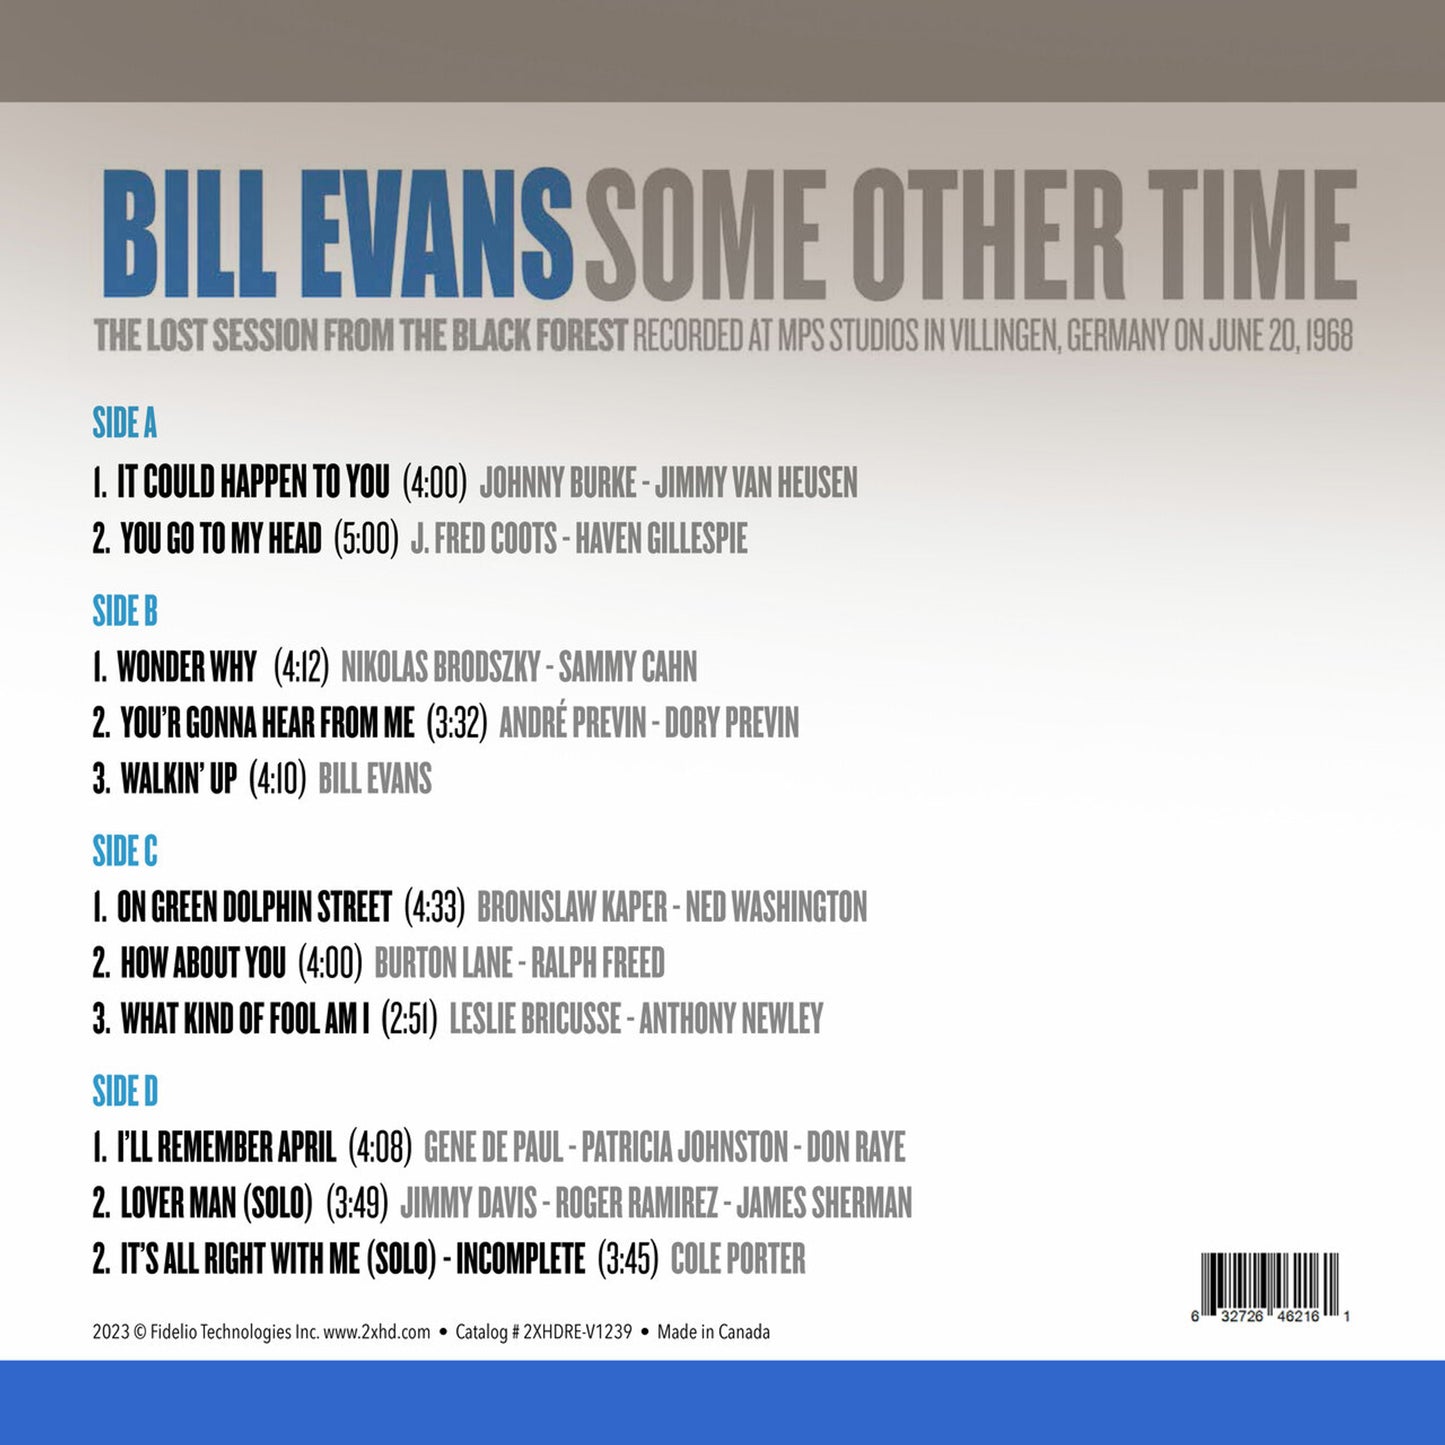 Bill Evans - Some Other Time: The Lost Session from the Black Forest Vol. 2 - 45rpm LP